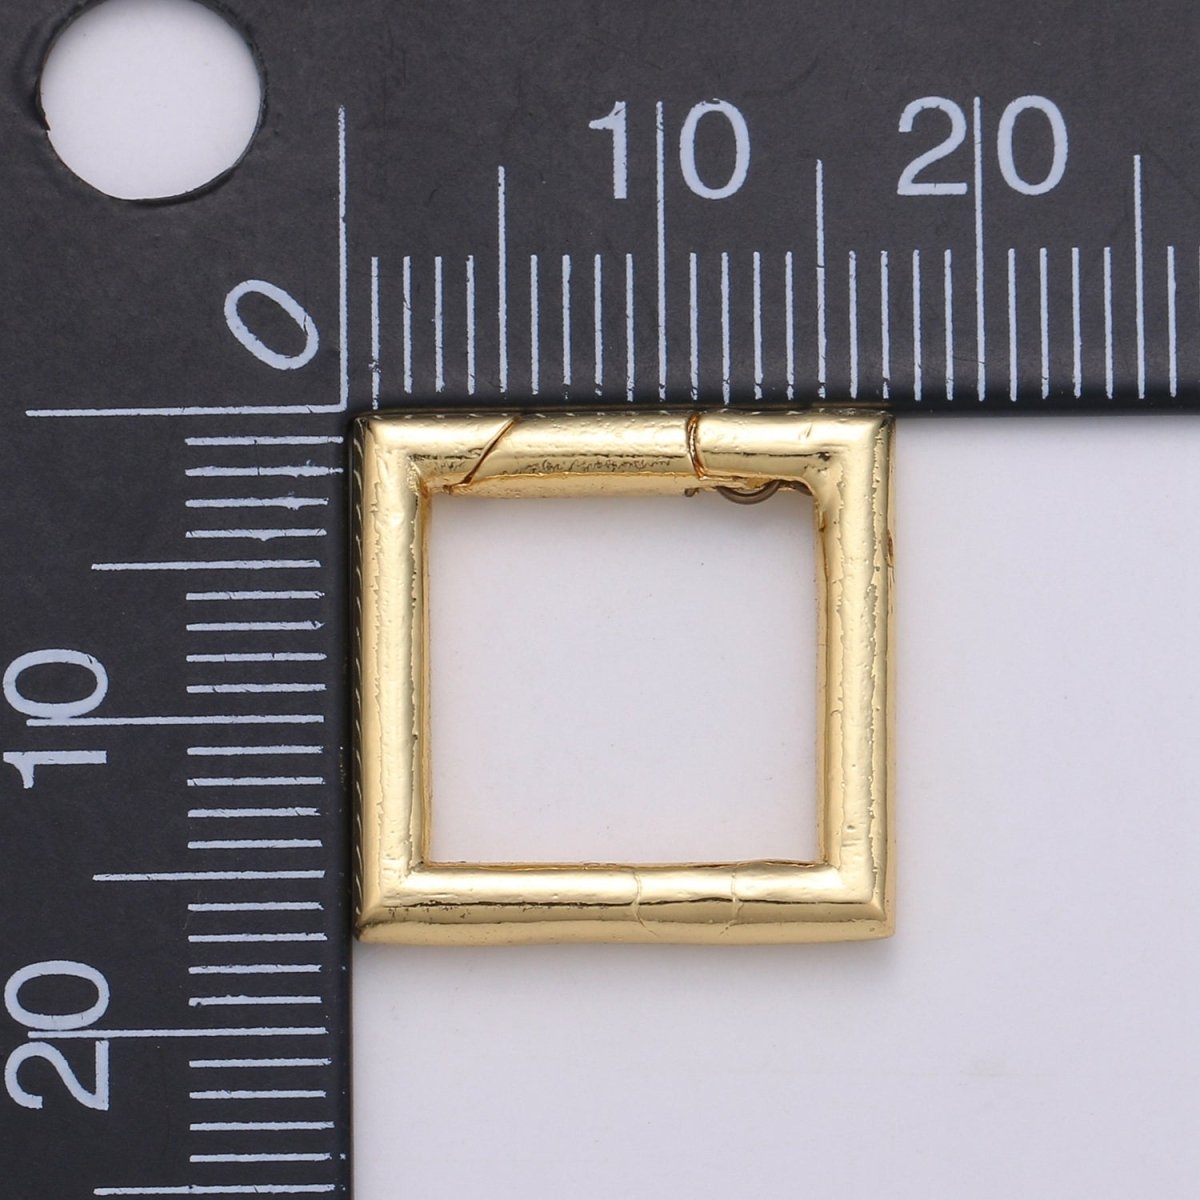 Simple Minimalist Gold Filled Square Push Gate Ring Clasp For Jewelry Making Charm Holder Connector L-060 - DLUXCA